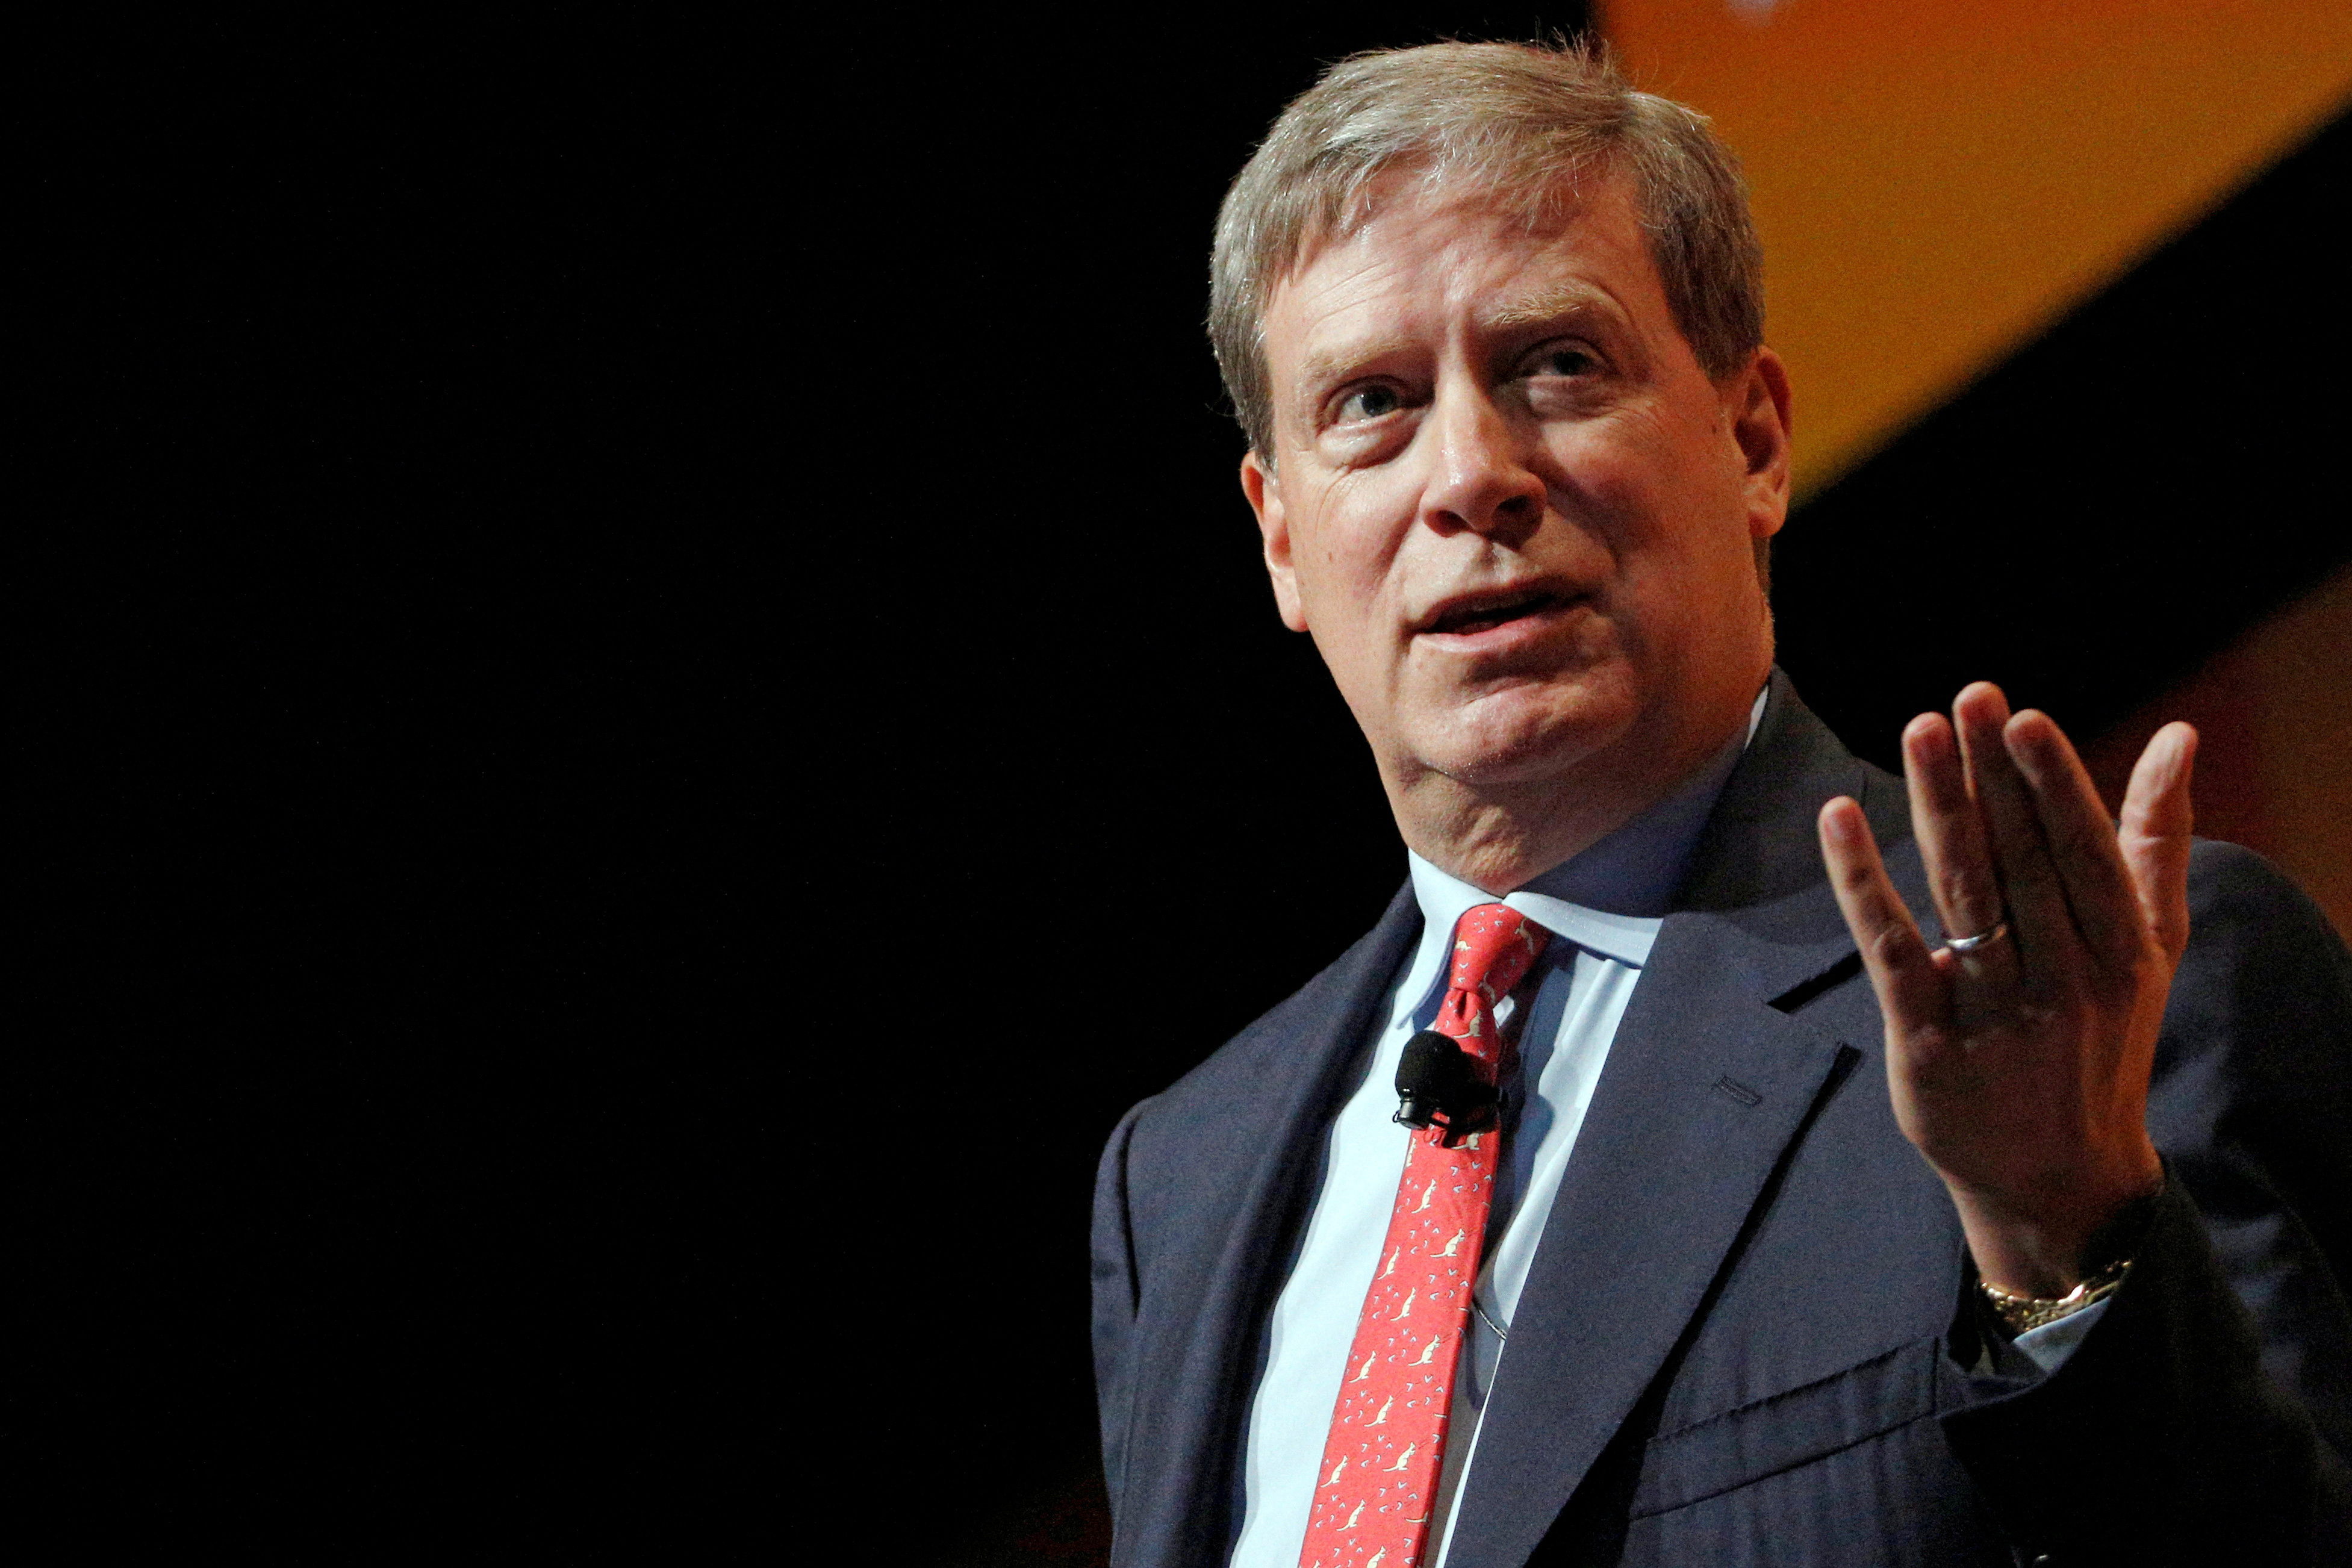 Stanley Druckenmiller, Chairman and CEO of Duquesne Family Office LLC., speaks at the Sohn Investment Conference in New York